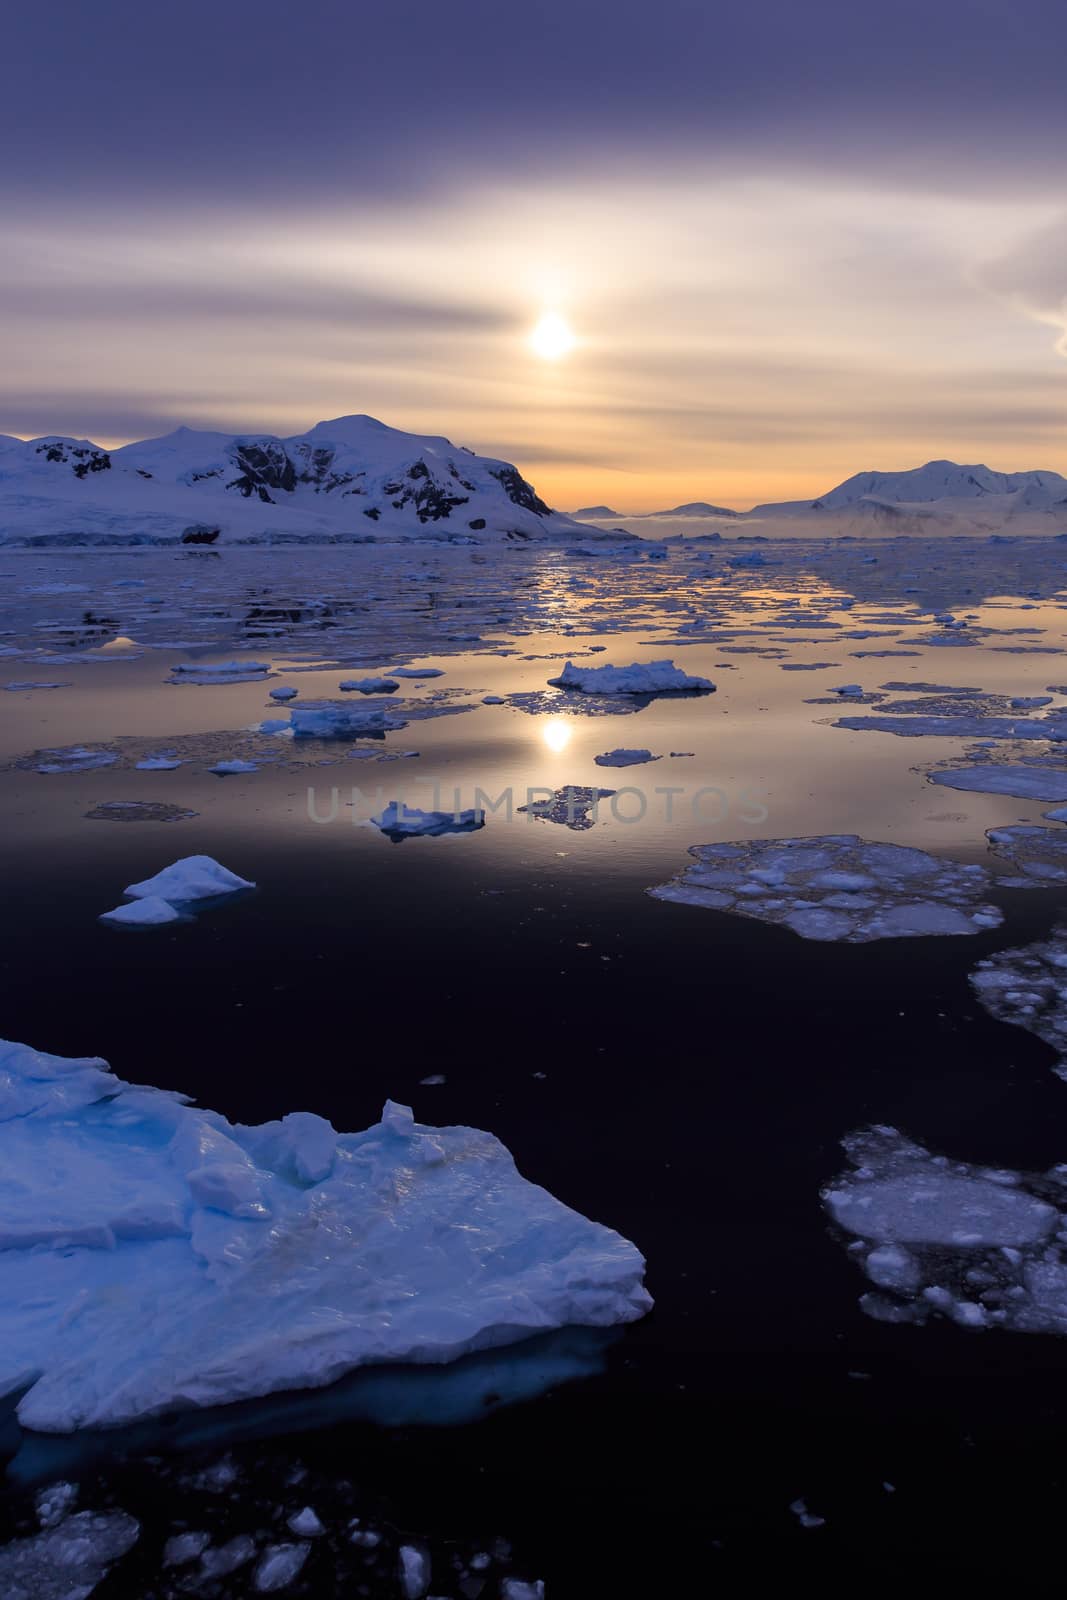 Sunset at Lemaire Channel, Antarctica by ambeon